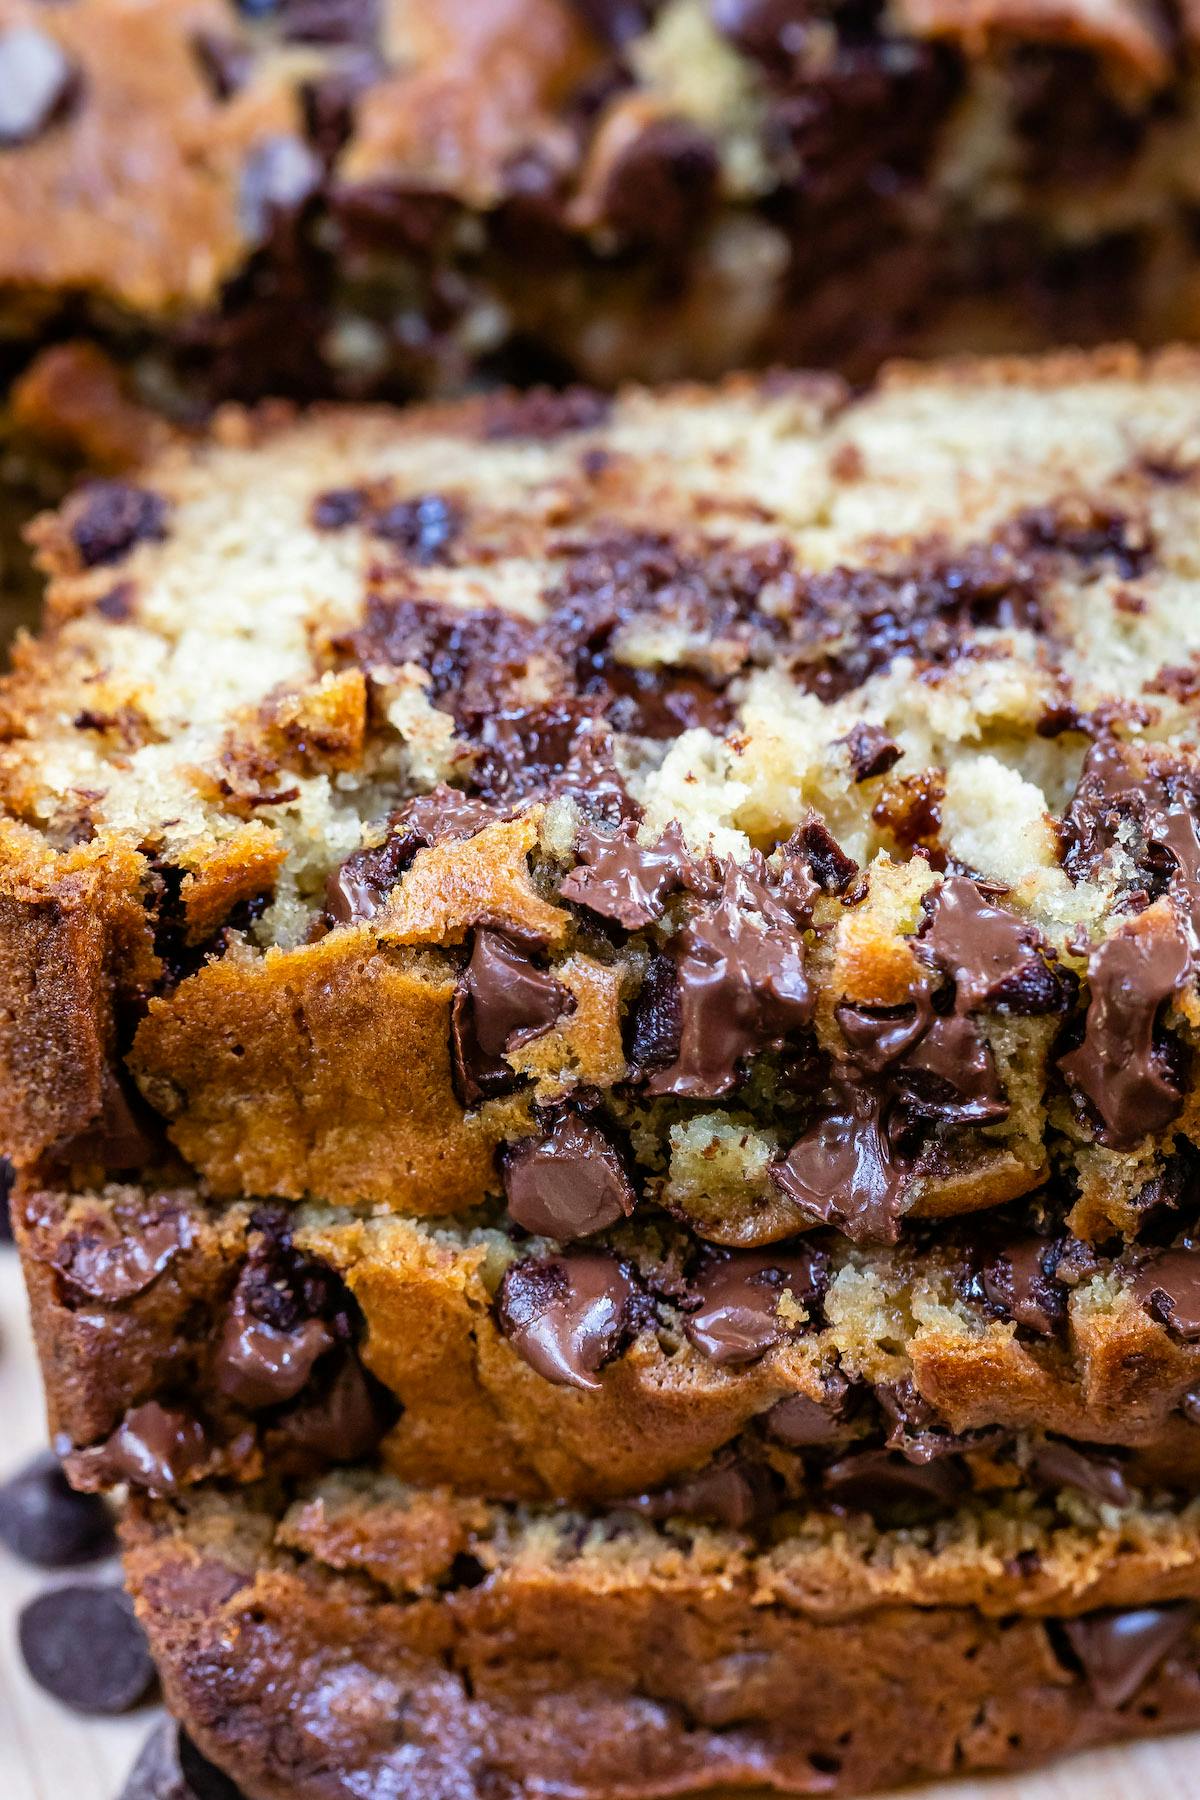 sliced banana bread with chocolate chips baked in.